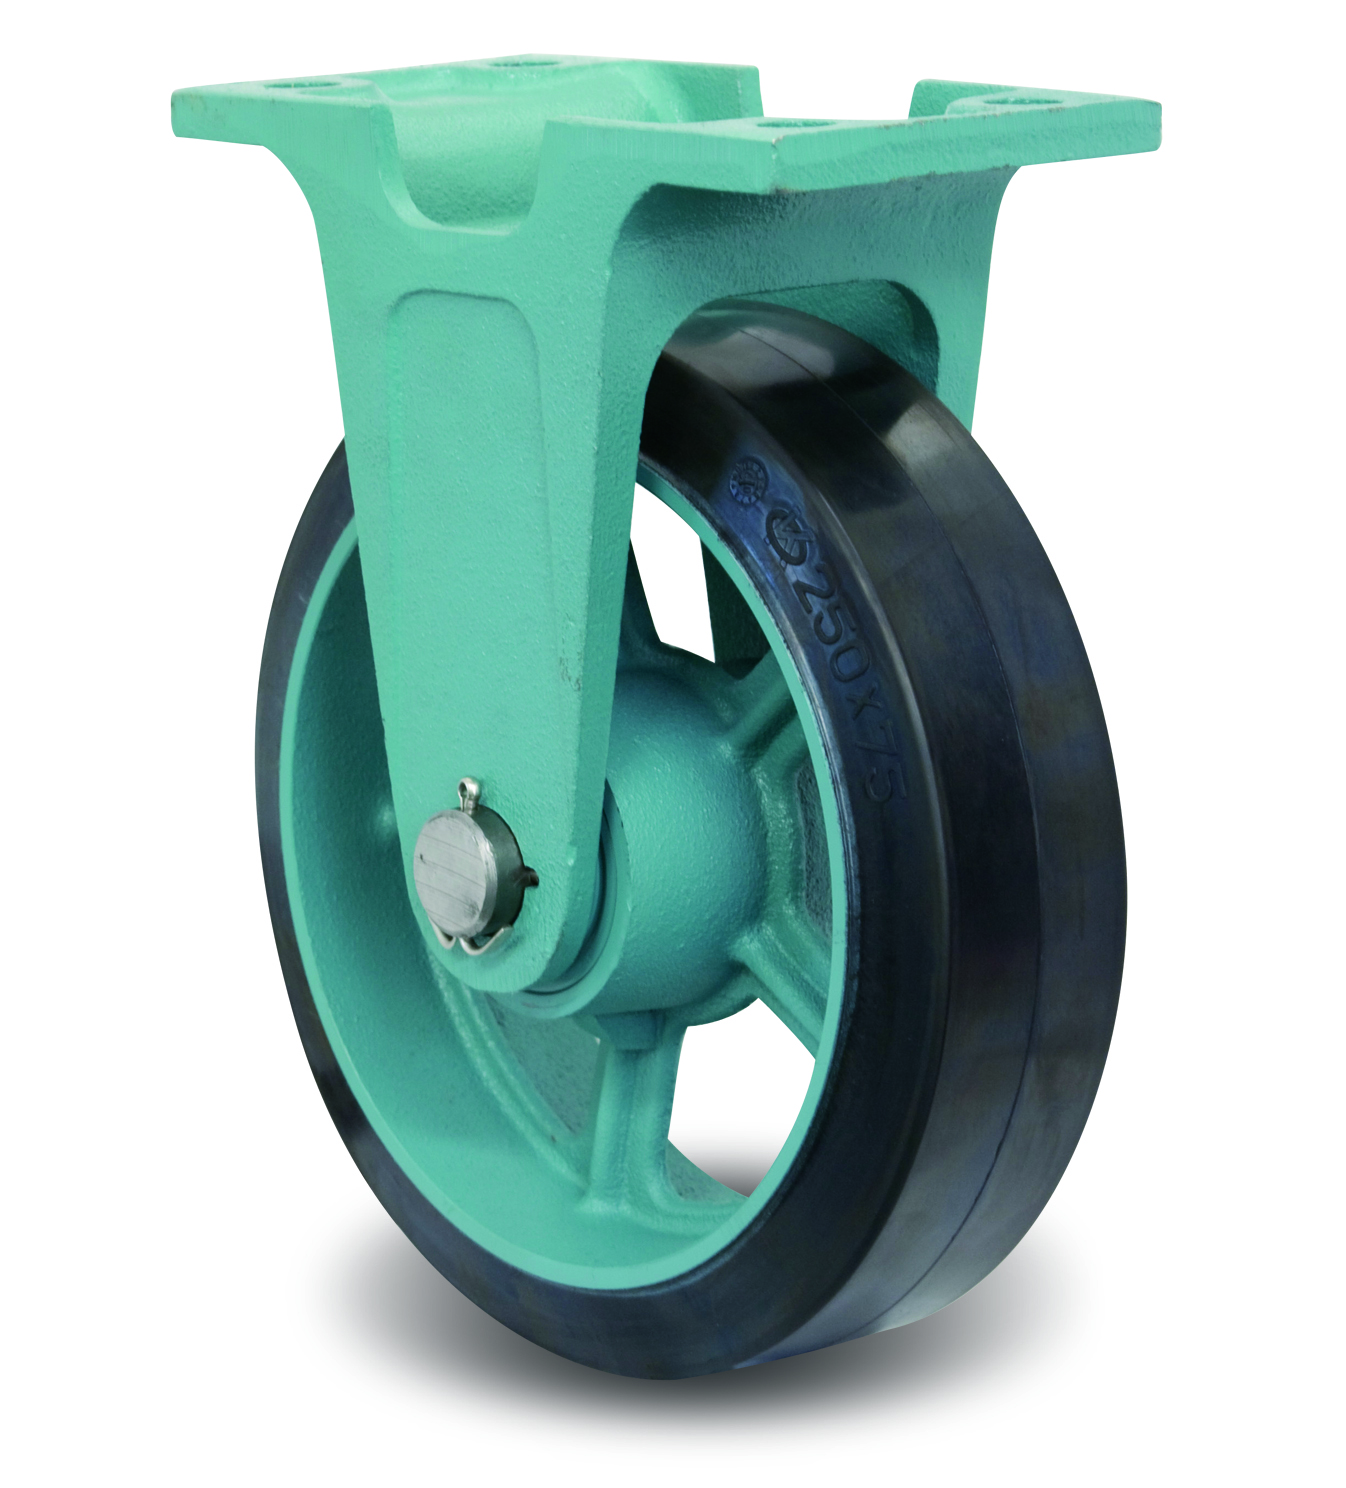 Casters - Wide Type Ductile Steel Fixed Plate Rubber, MG-W, E/MG-W Series. EMG-W250X75